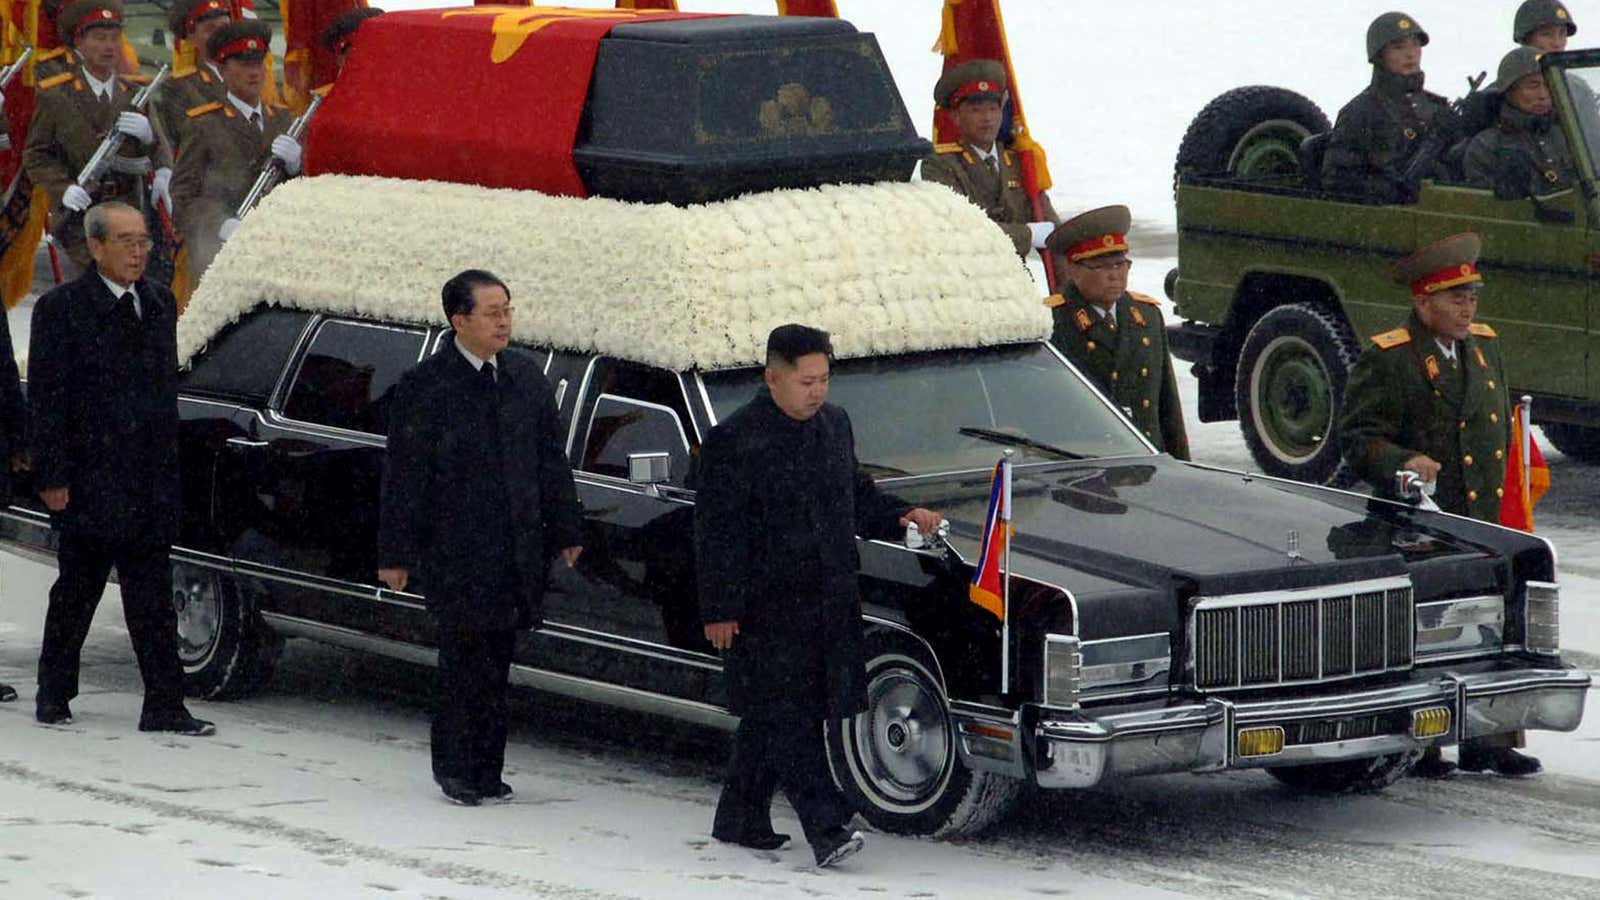 North Korean leader Kim Jong-un walks at the front of his father Kim Jong-il’s funeral cortege in 2011.